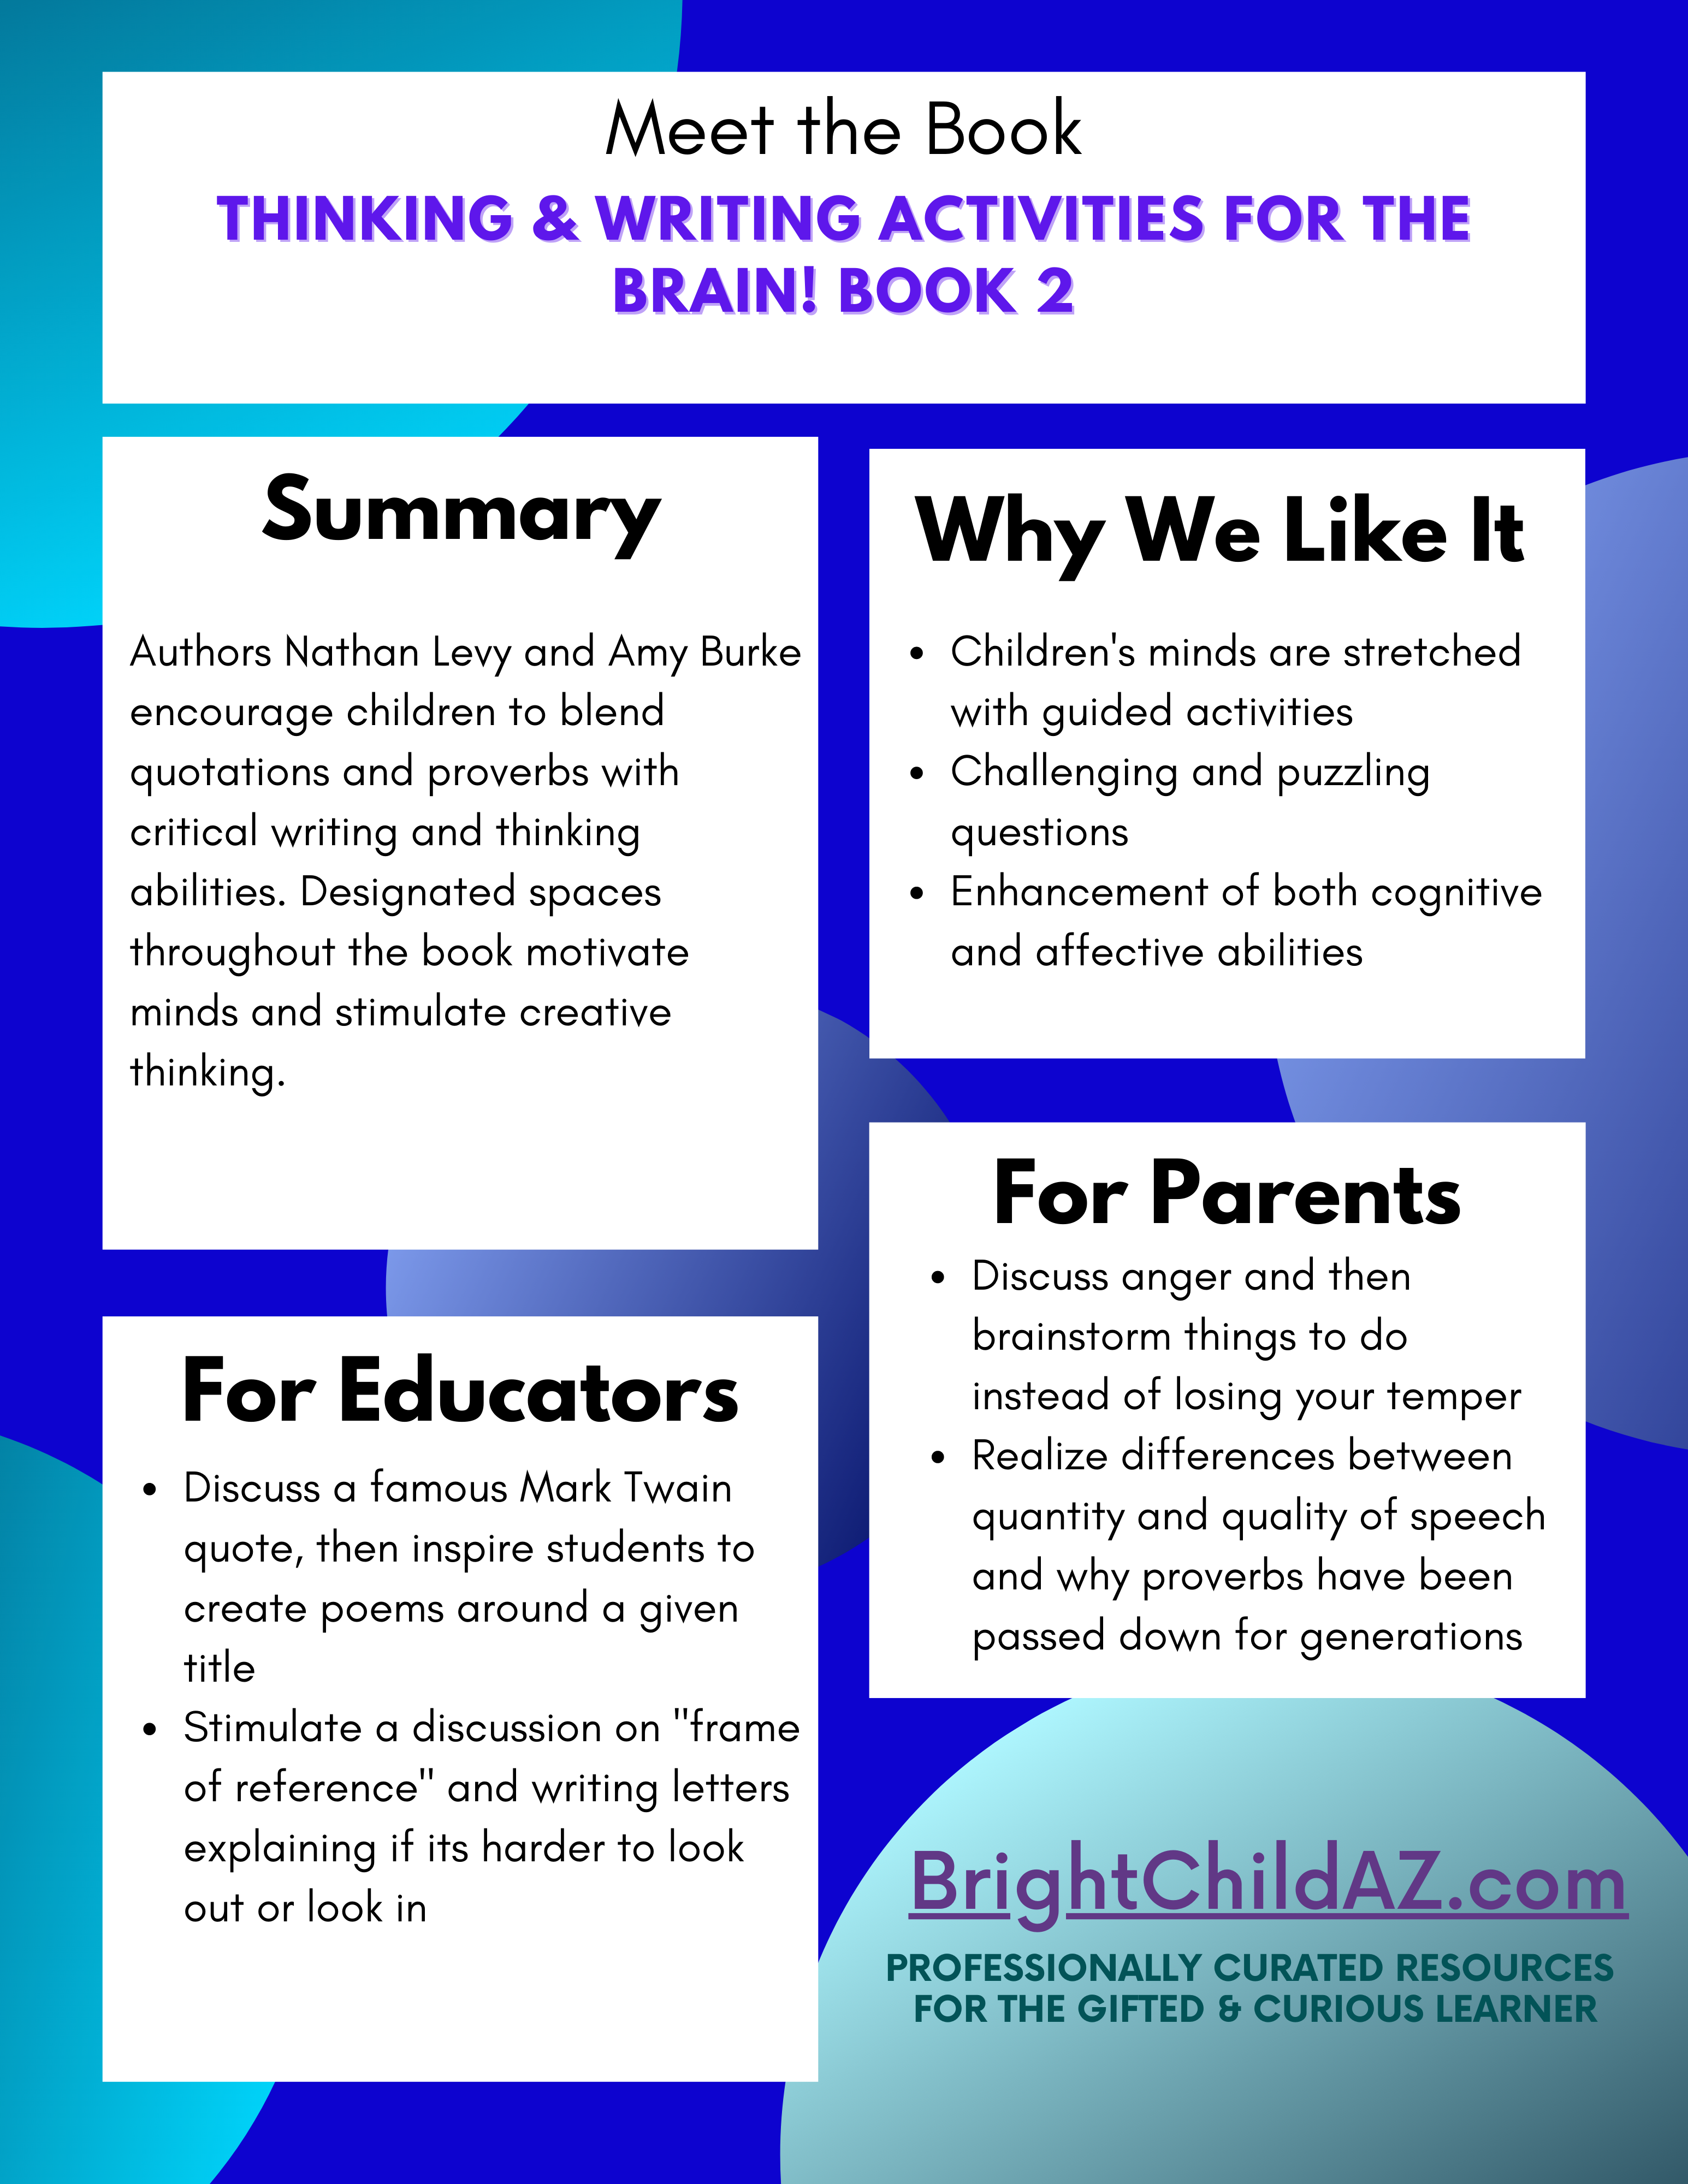 Thinking & Writing Activities for the Brain (Book 2)